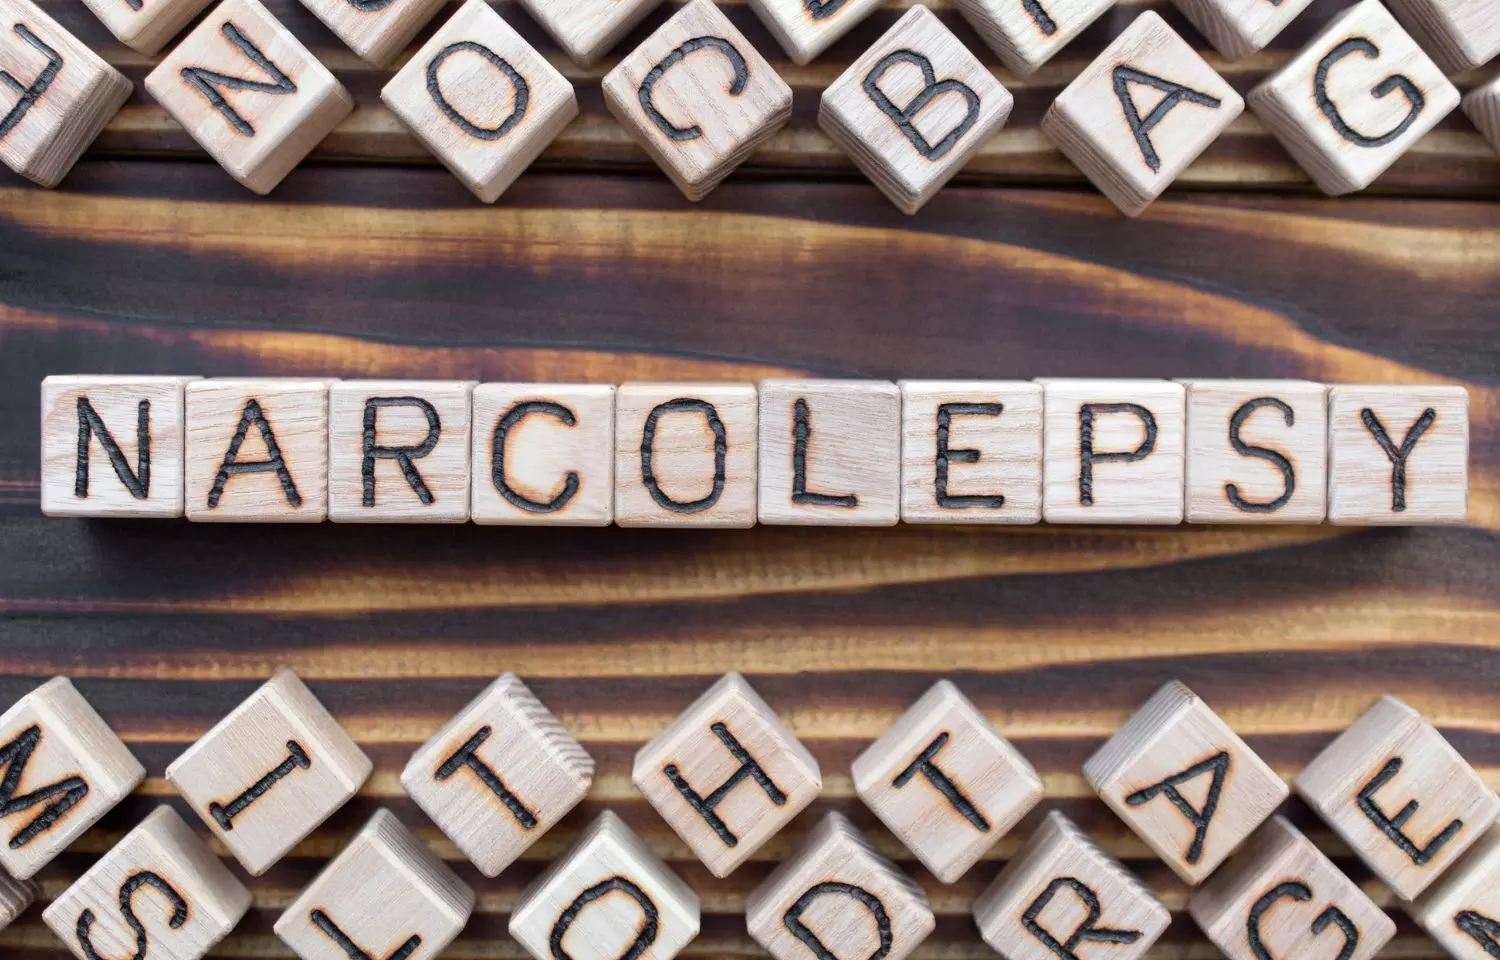 September 22 is observed as World Narcolepsy Day: A disease that mostly goes misdiagnosed